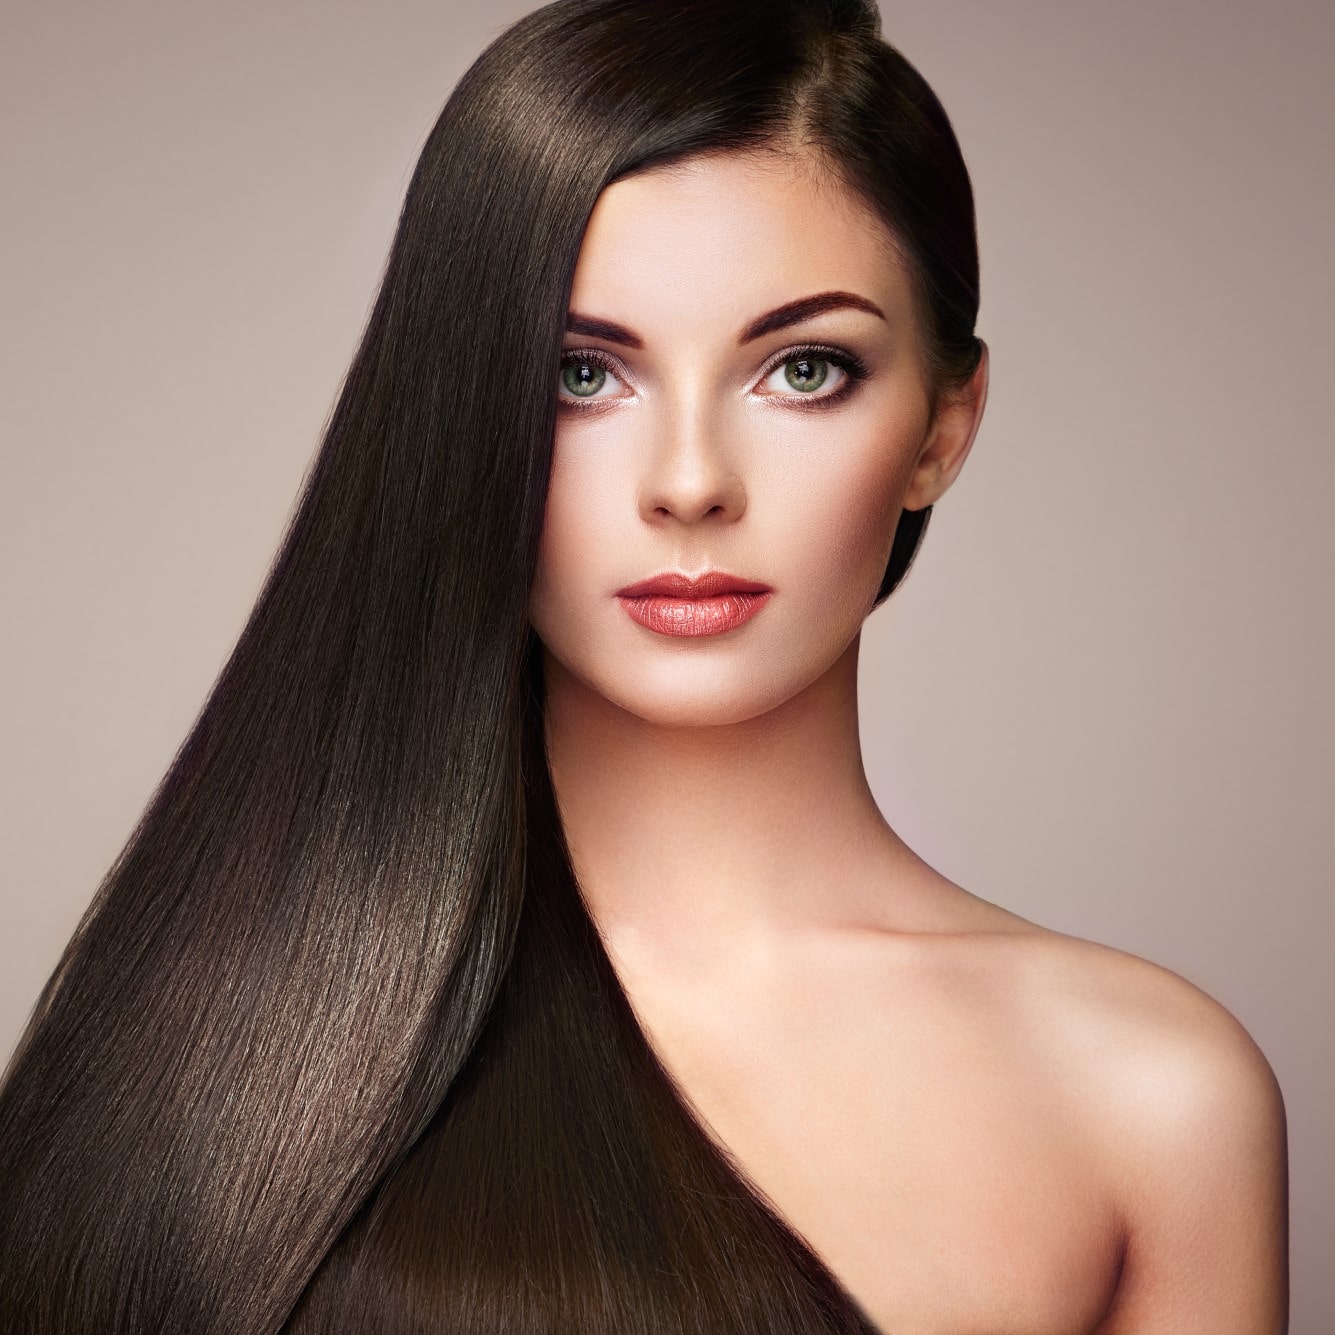 Luxter smoothing hair straightening service in Brussels, Belgium for women